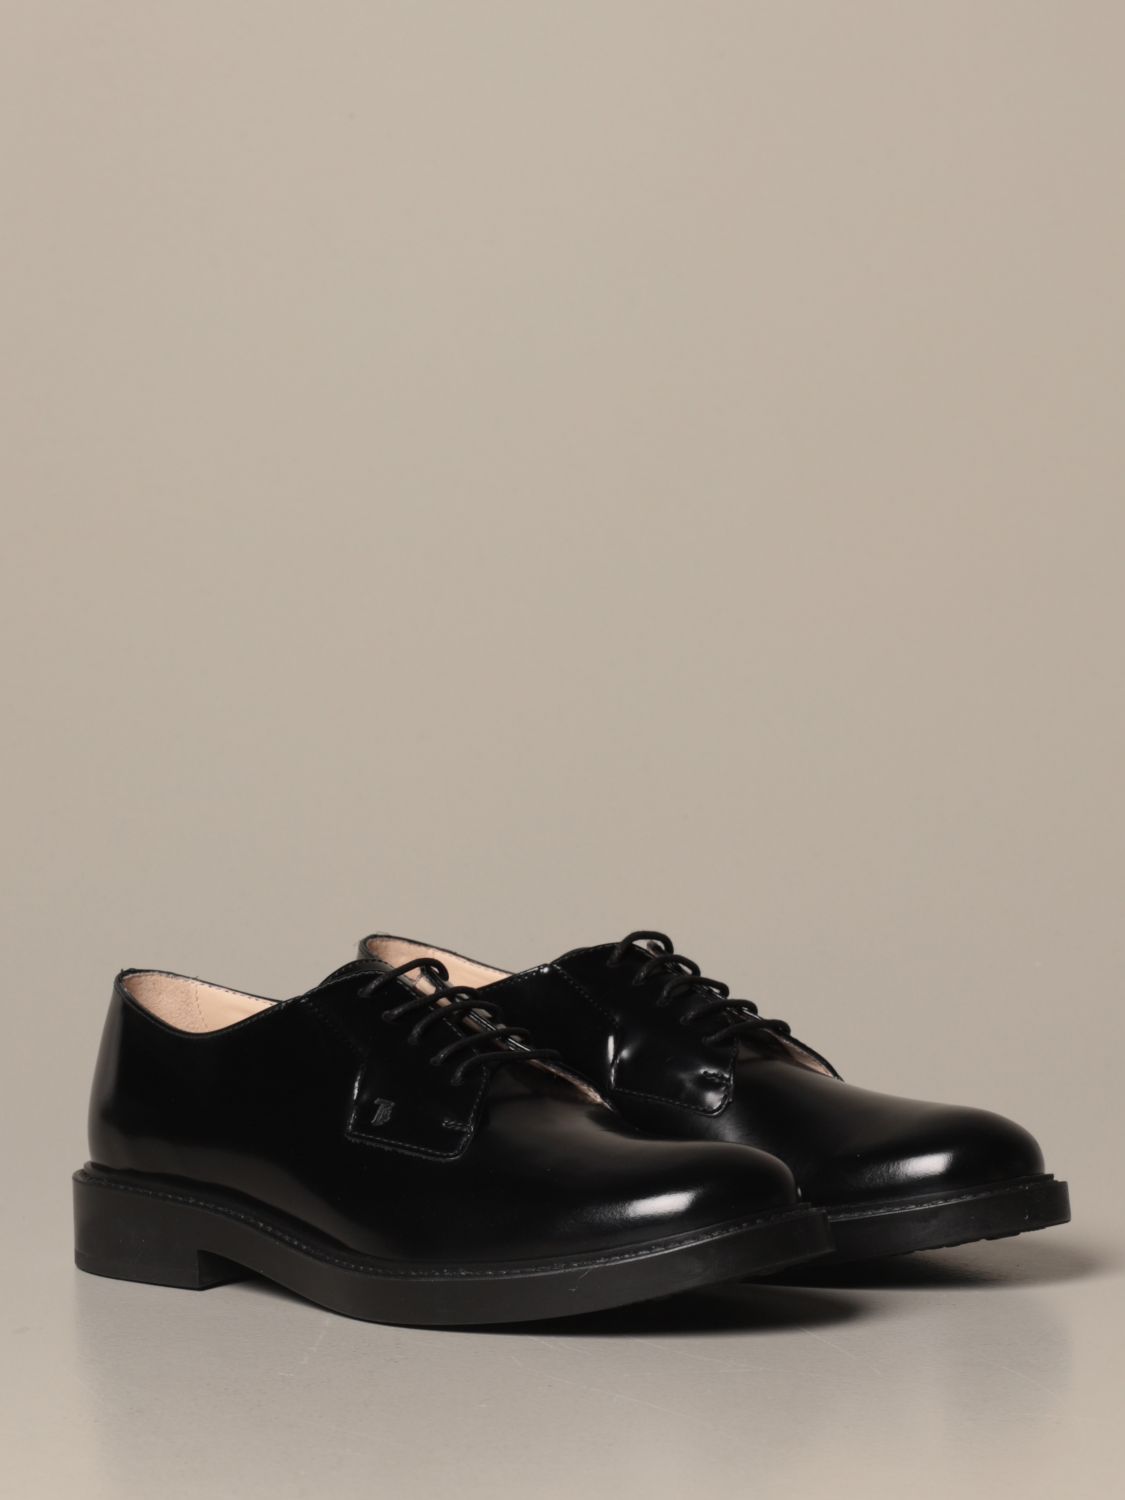 tods oxford shoes